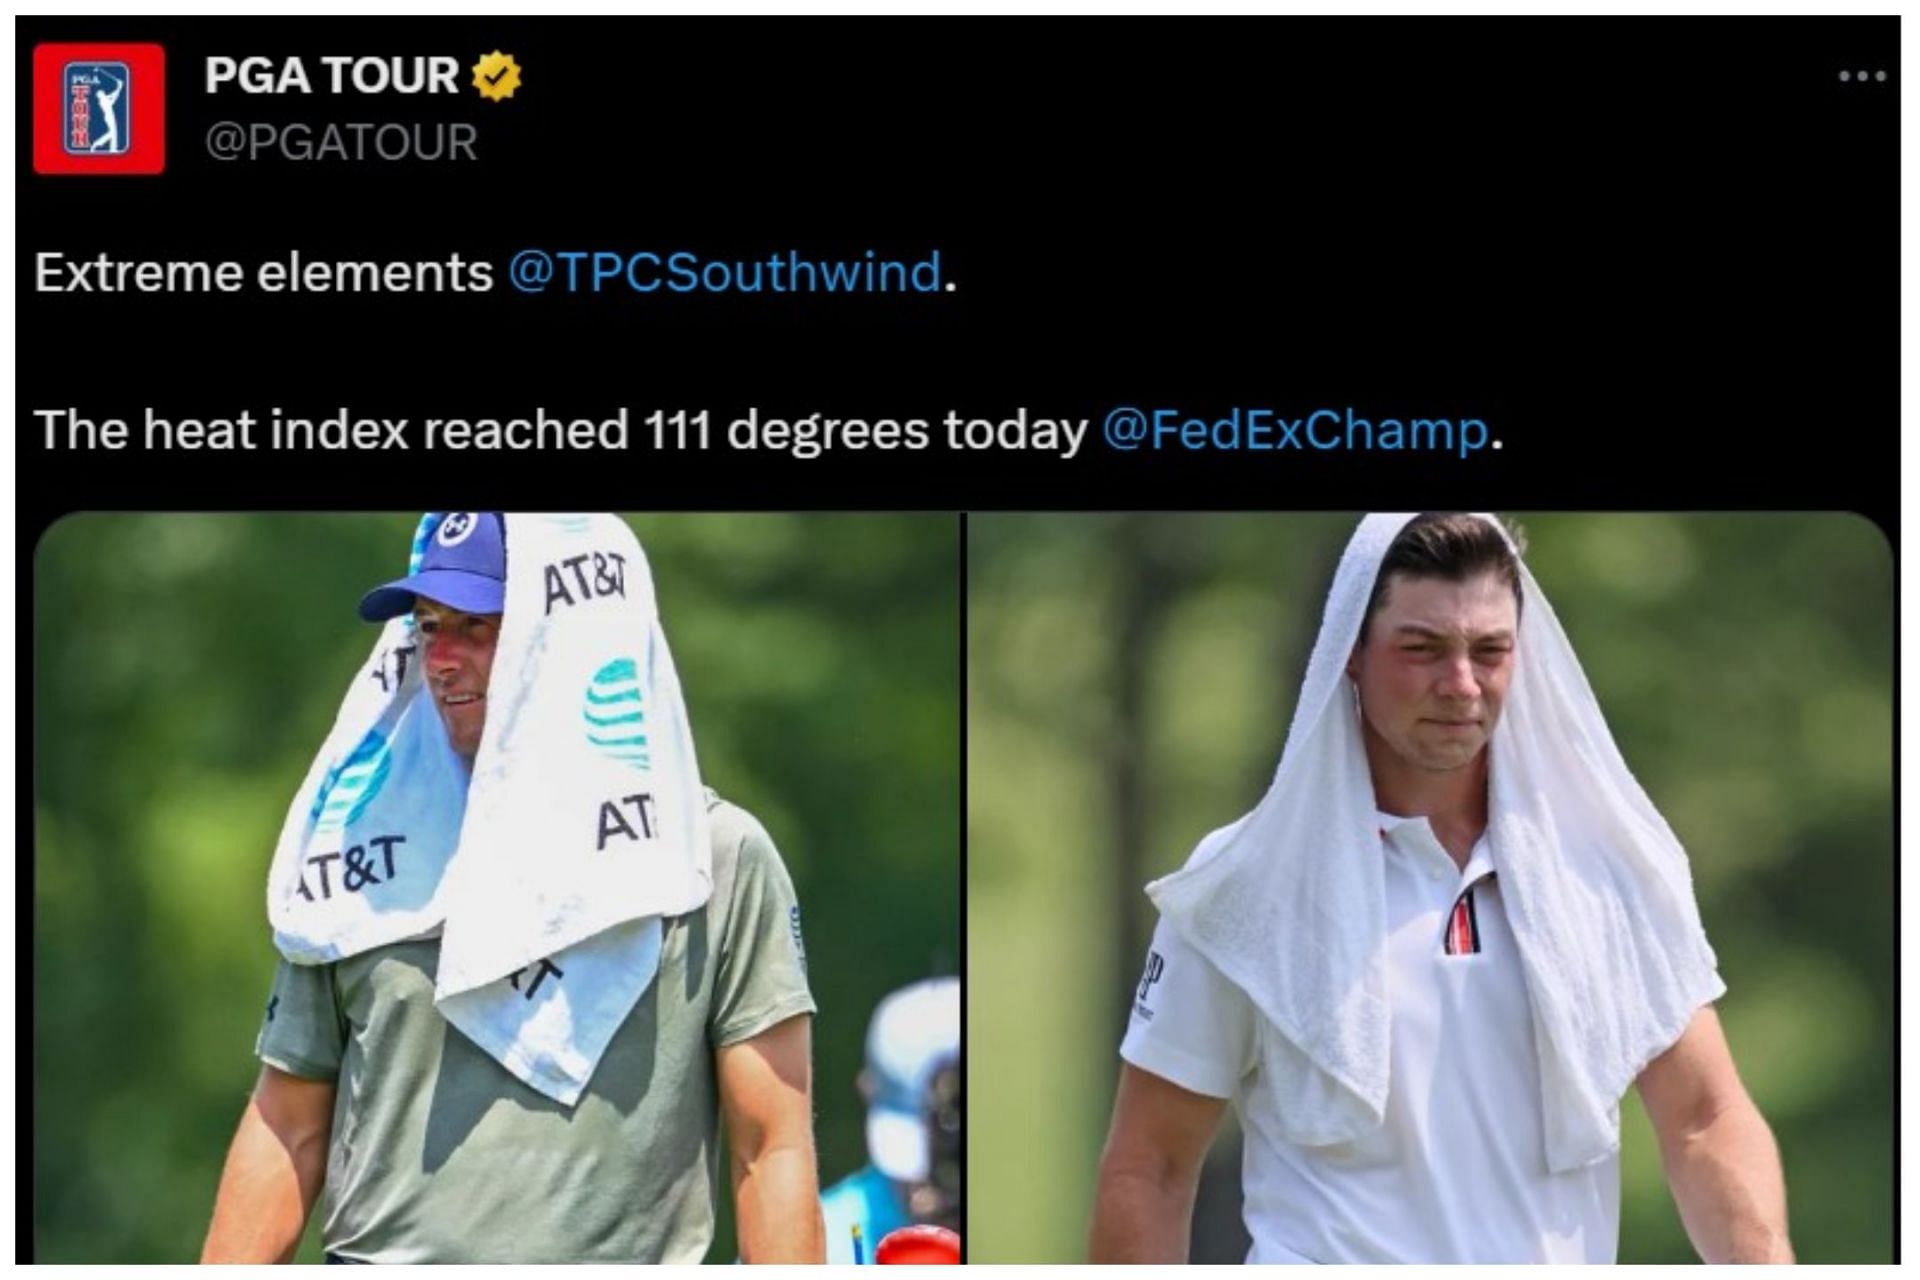 Jordan Spieth and Viktor Hovland were seen using wet towels during the FedEx St. Jude Championship, round 2 (Image via Twitter.com/PGATour)